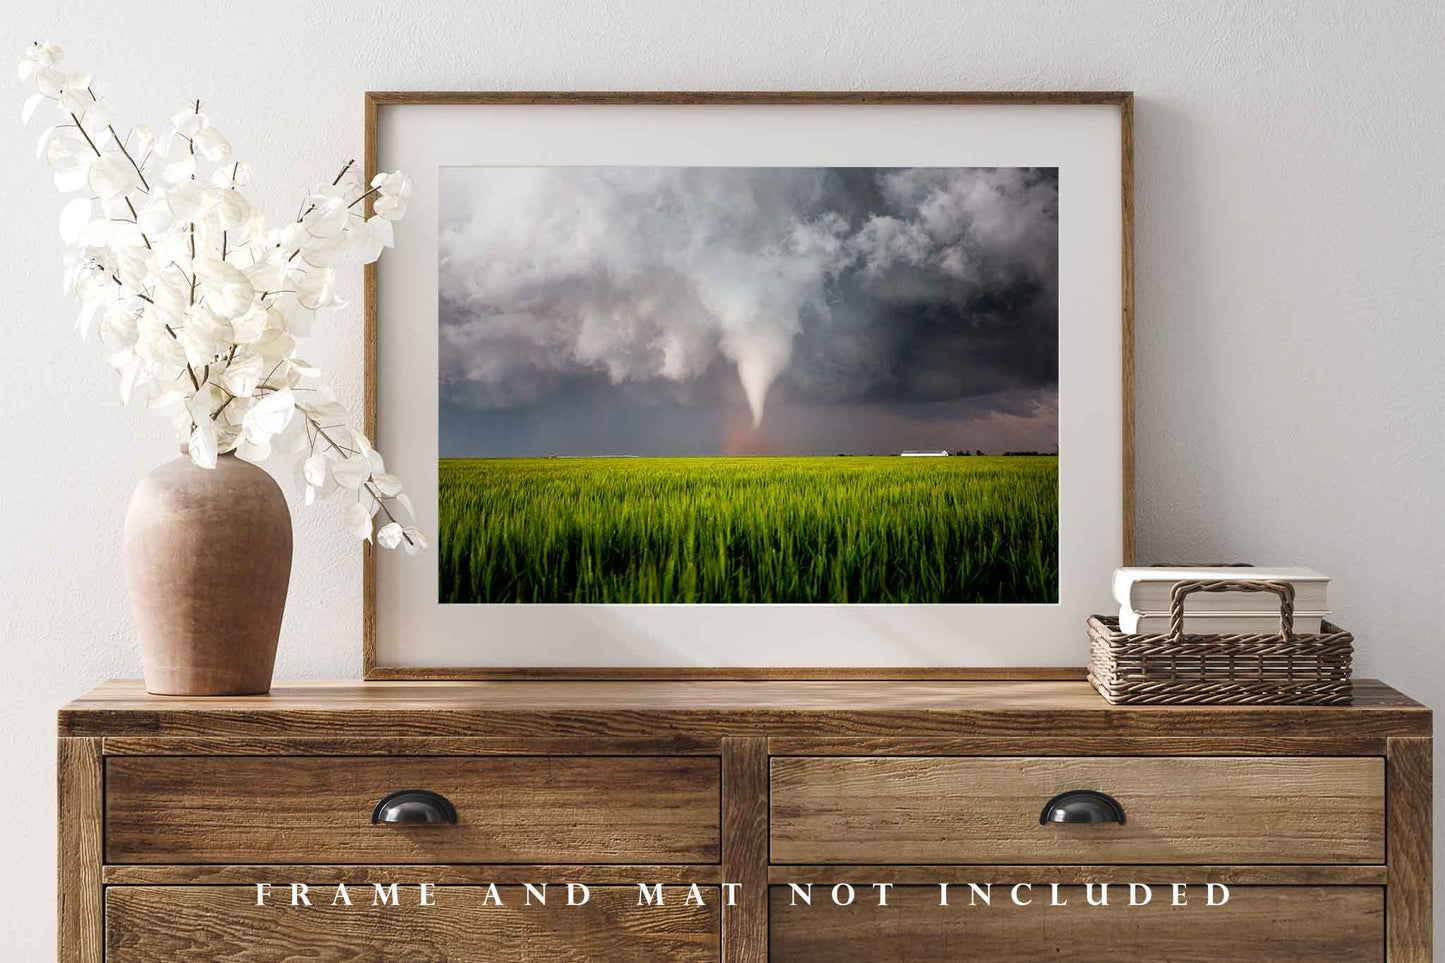 Storm Photo Print | Tornado Over Wheat Field Picture | Texas Wall Art | Thunderstorm Photography | Weather Decor